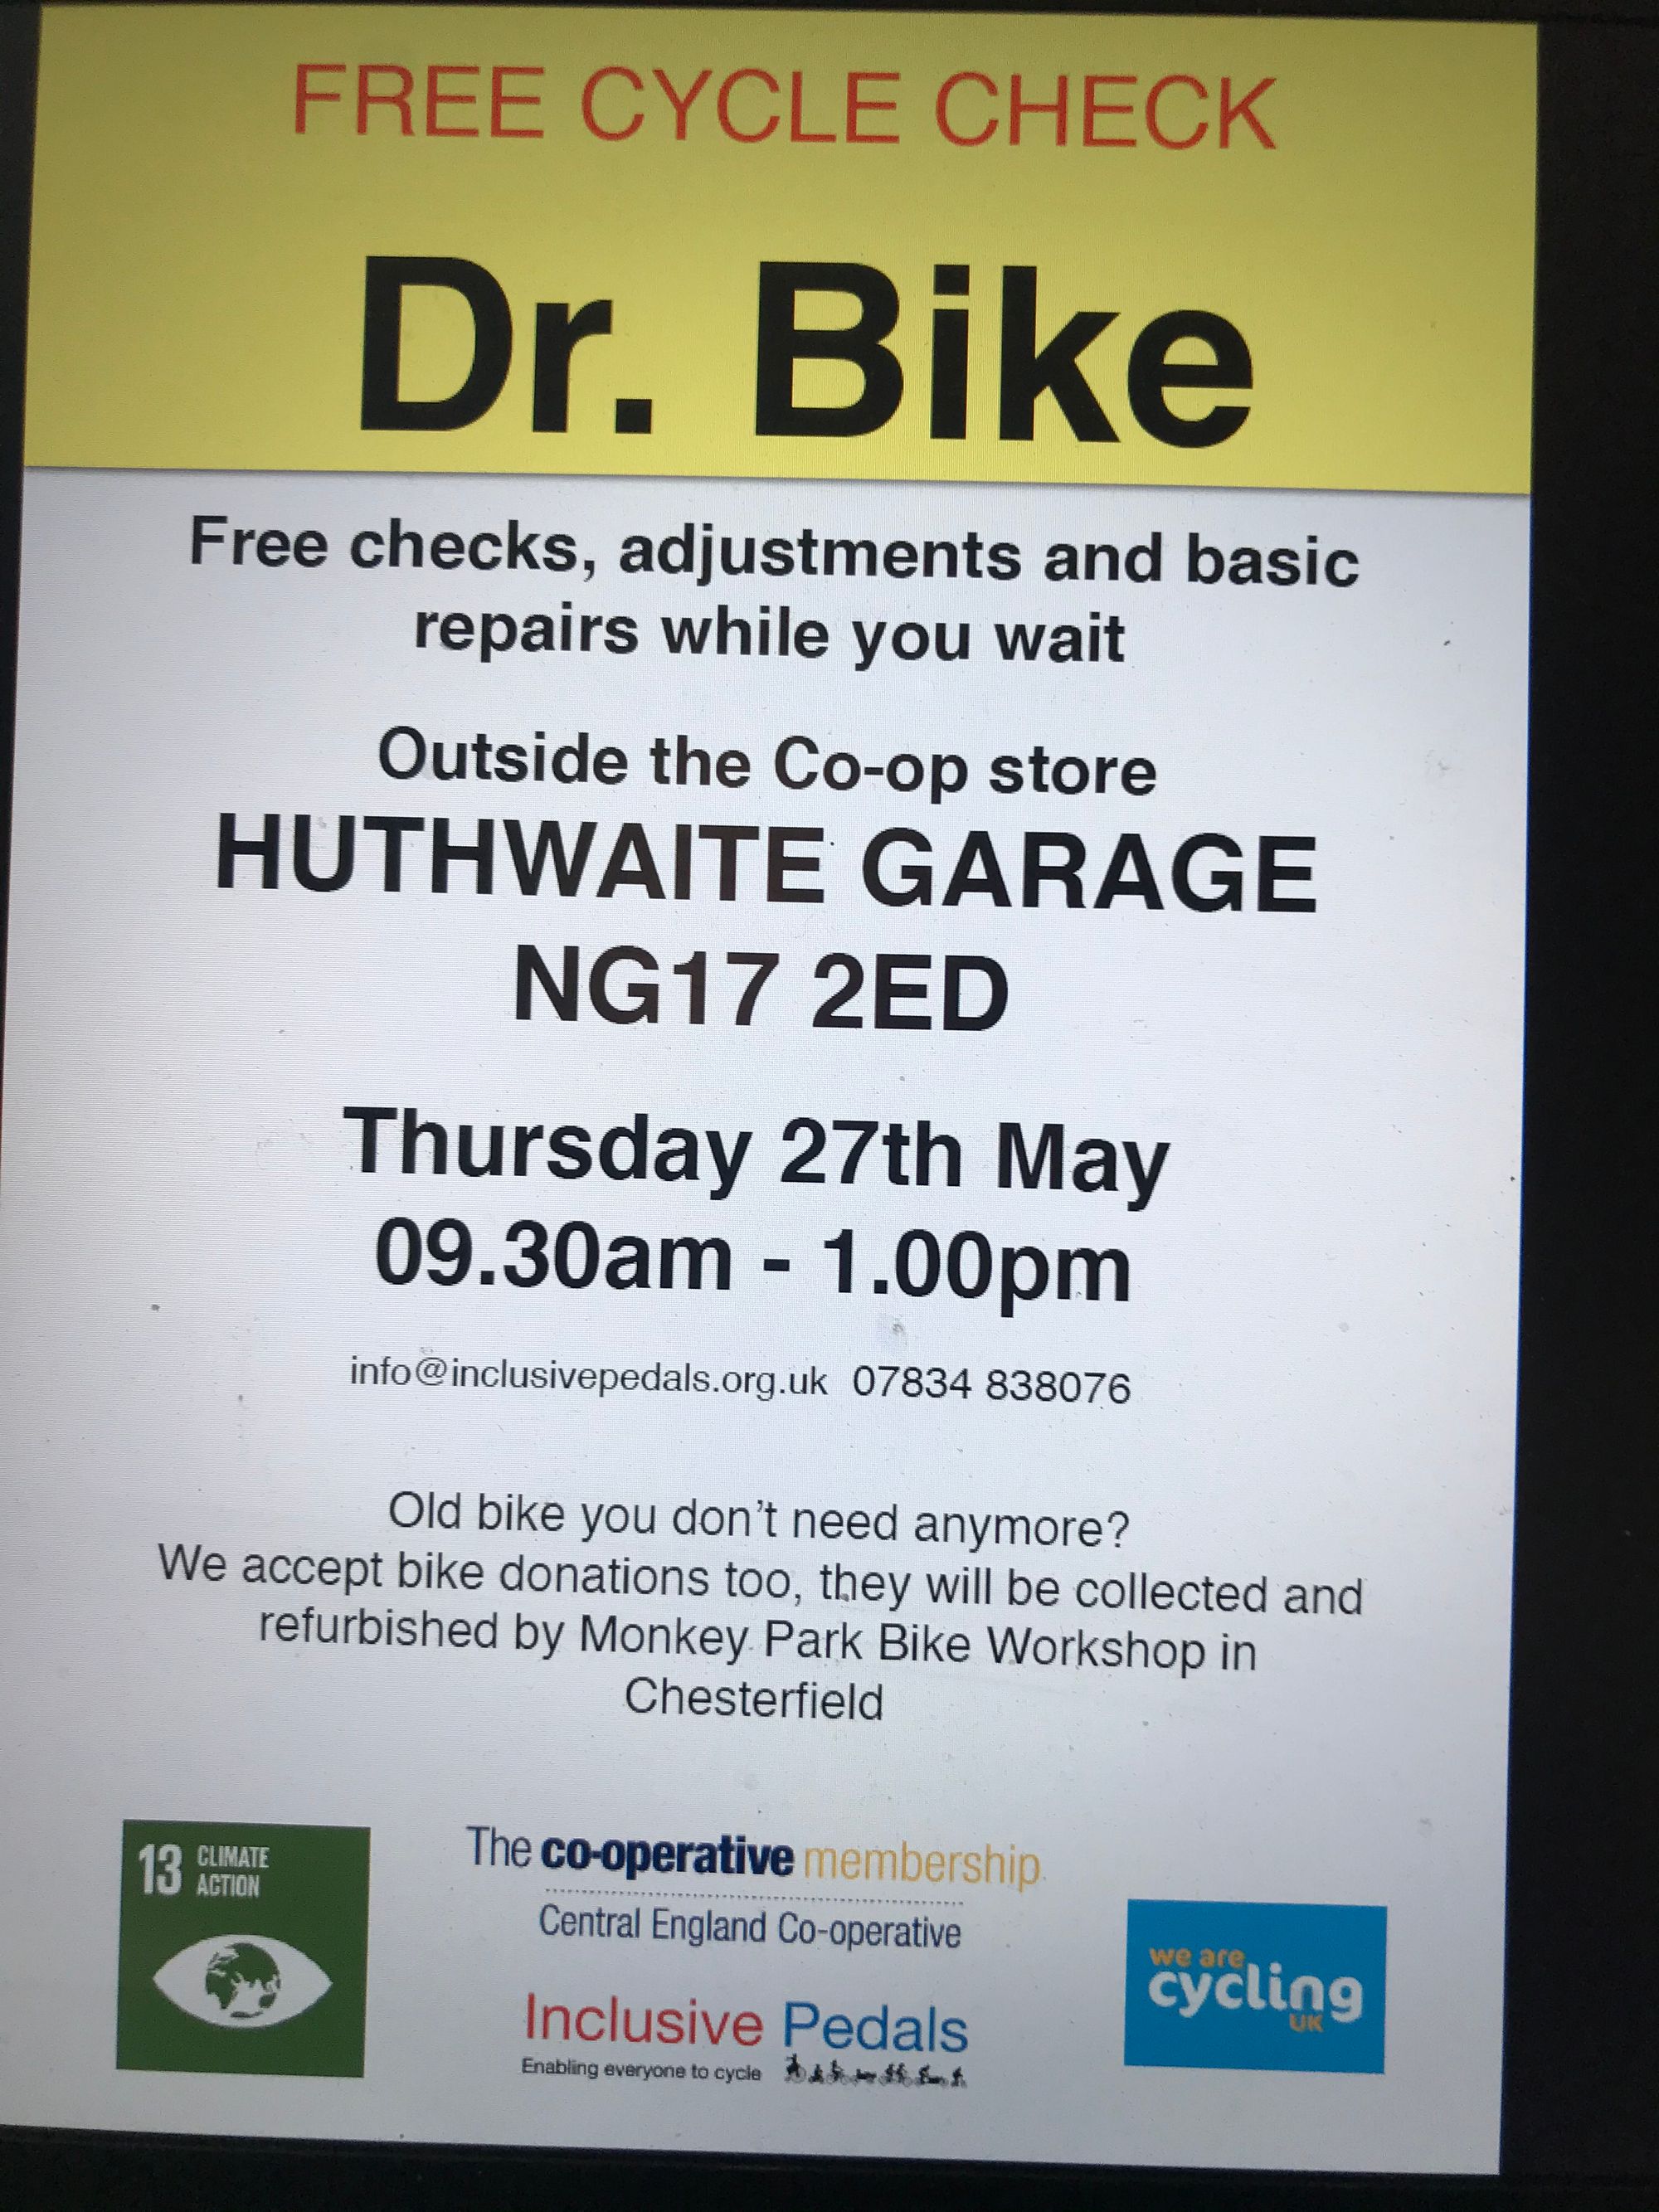 Helping Climate Change.  Take small steps to improve your lifestyles.  Free Bike checks and  also donate unwanted bikes to help others.